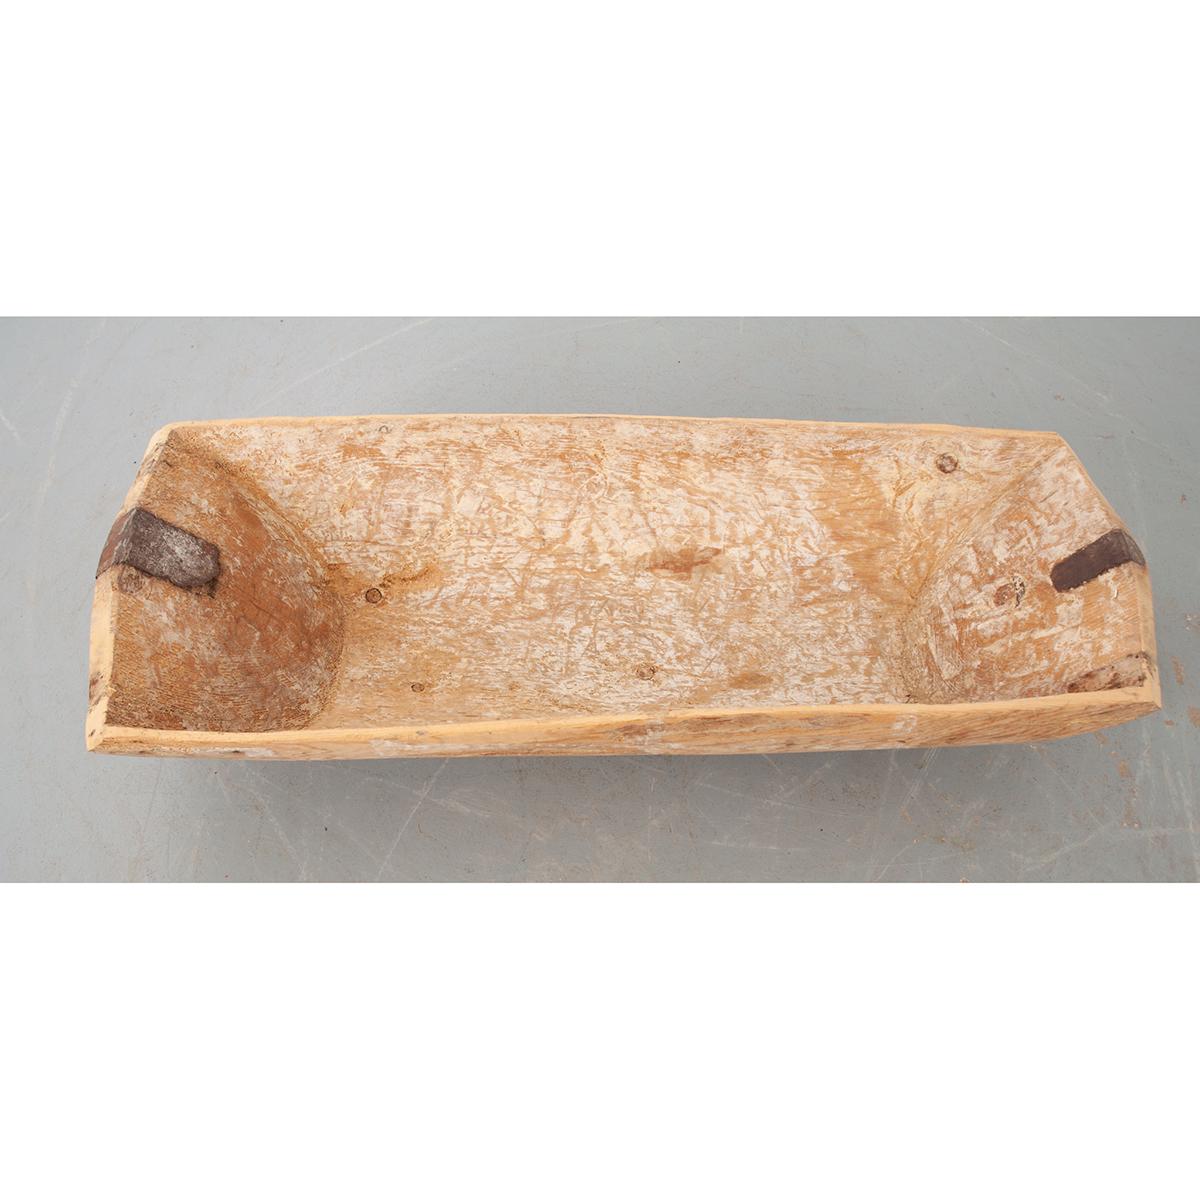 This is a French dough bowl, a wooden vessel used to mix bread dough. These bowls were found in every home and were typically carved from a large piece of wood. Now, it would make a nice conversation piece or decorate a dining room table. Circa